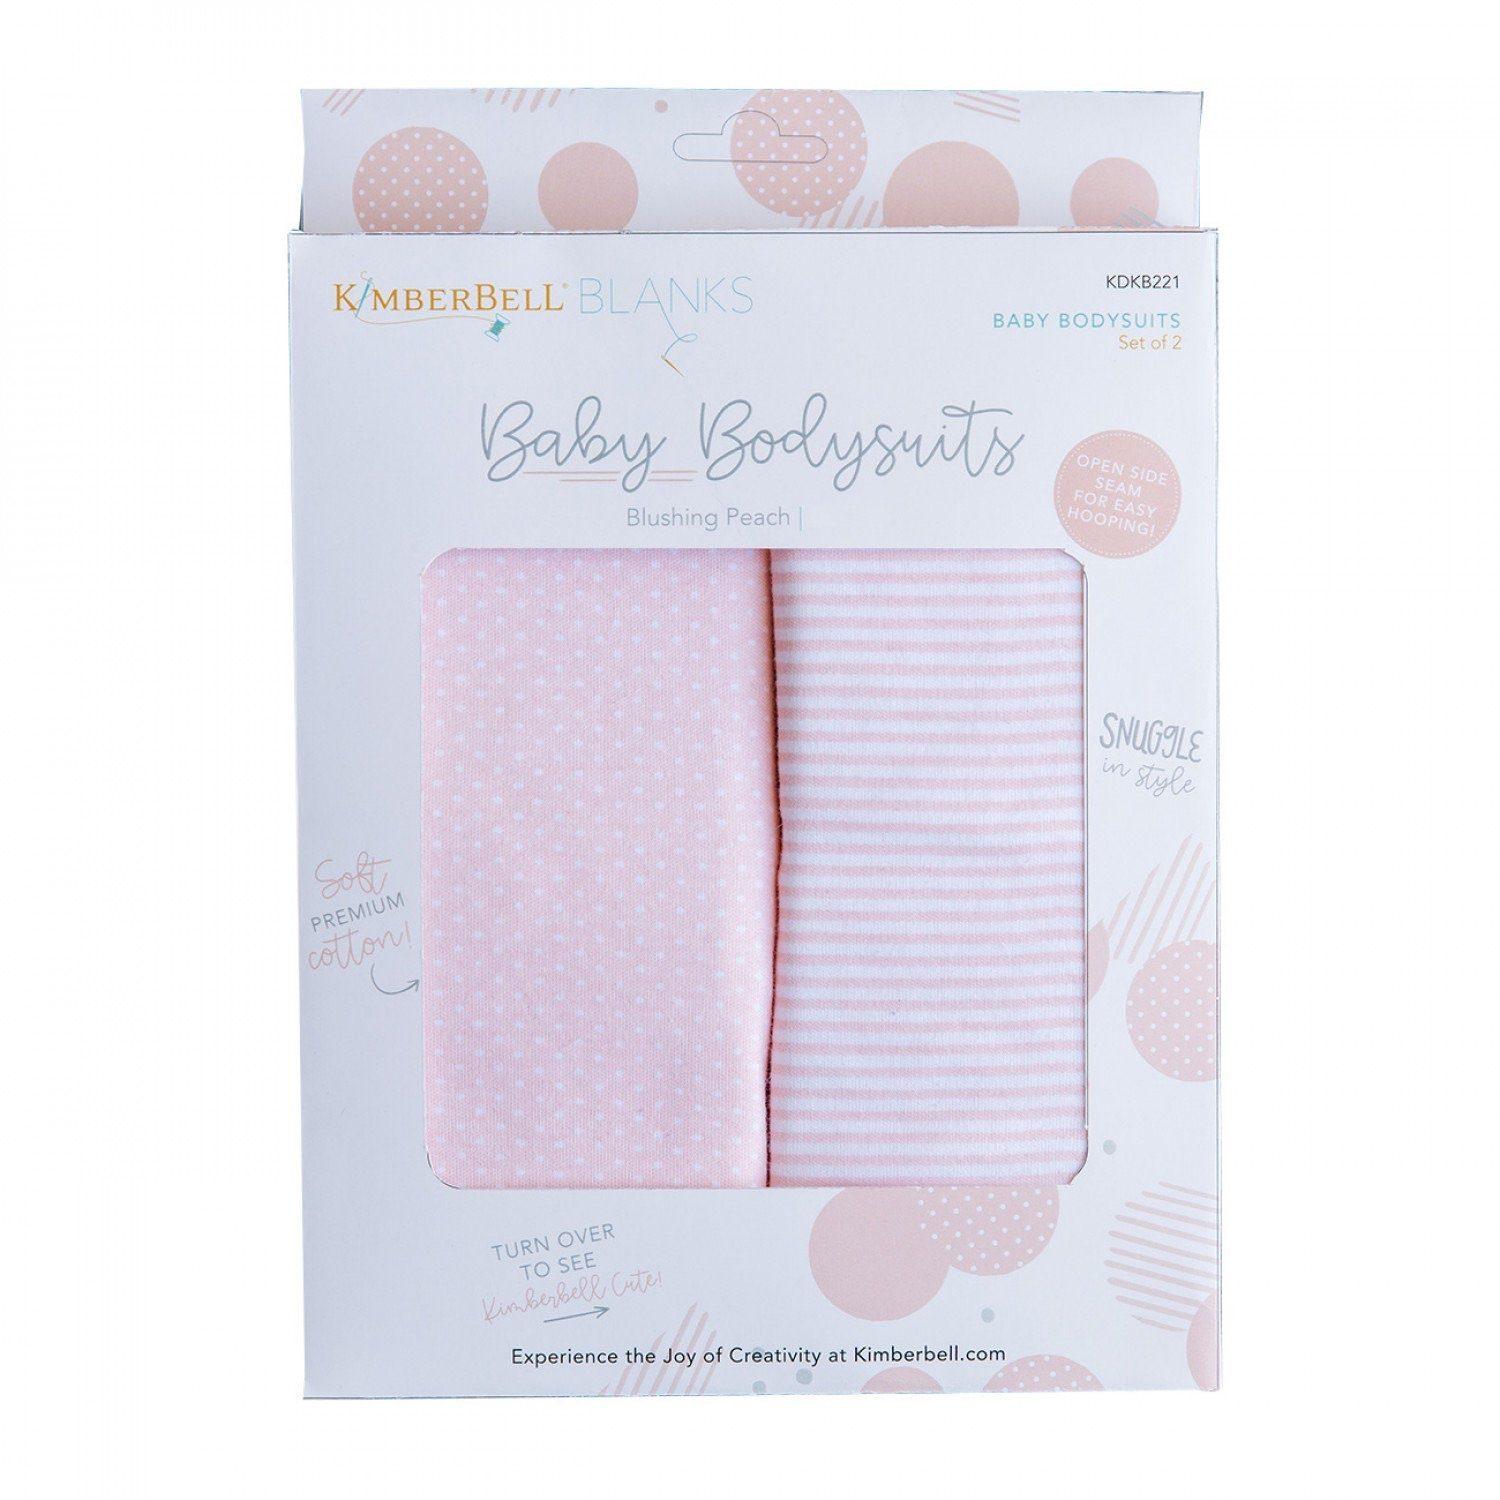 Baby Bodysuits - Blushing Peach -  (6-9 Months) - Pack of 2 - Kimberbell - Kawartha Quilting and Sewing LTD.